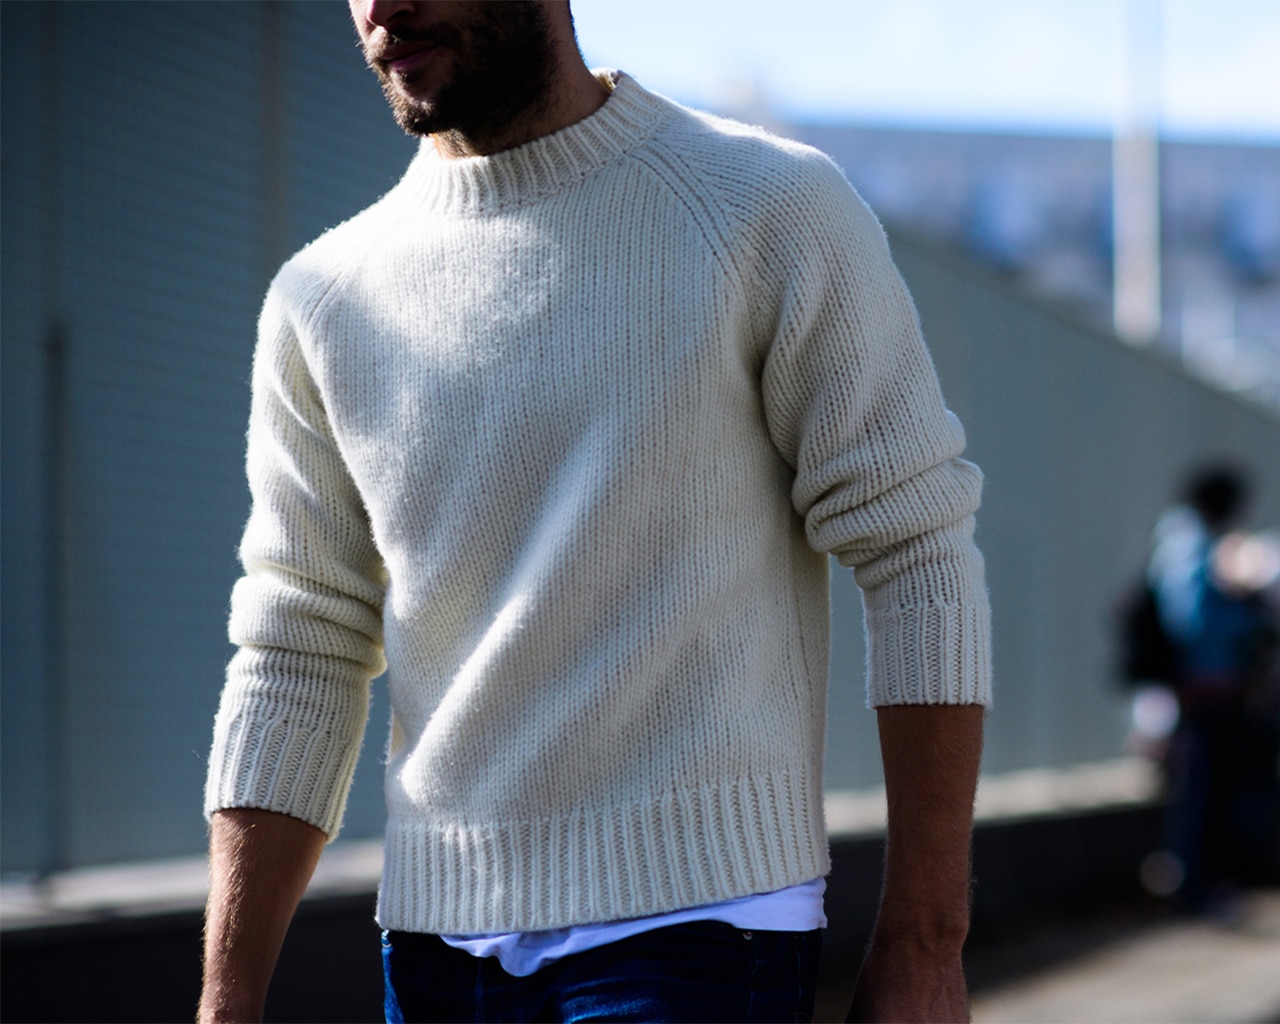 Everything You Need To Know About Knitwear | The Journal | MR PORTER